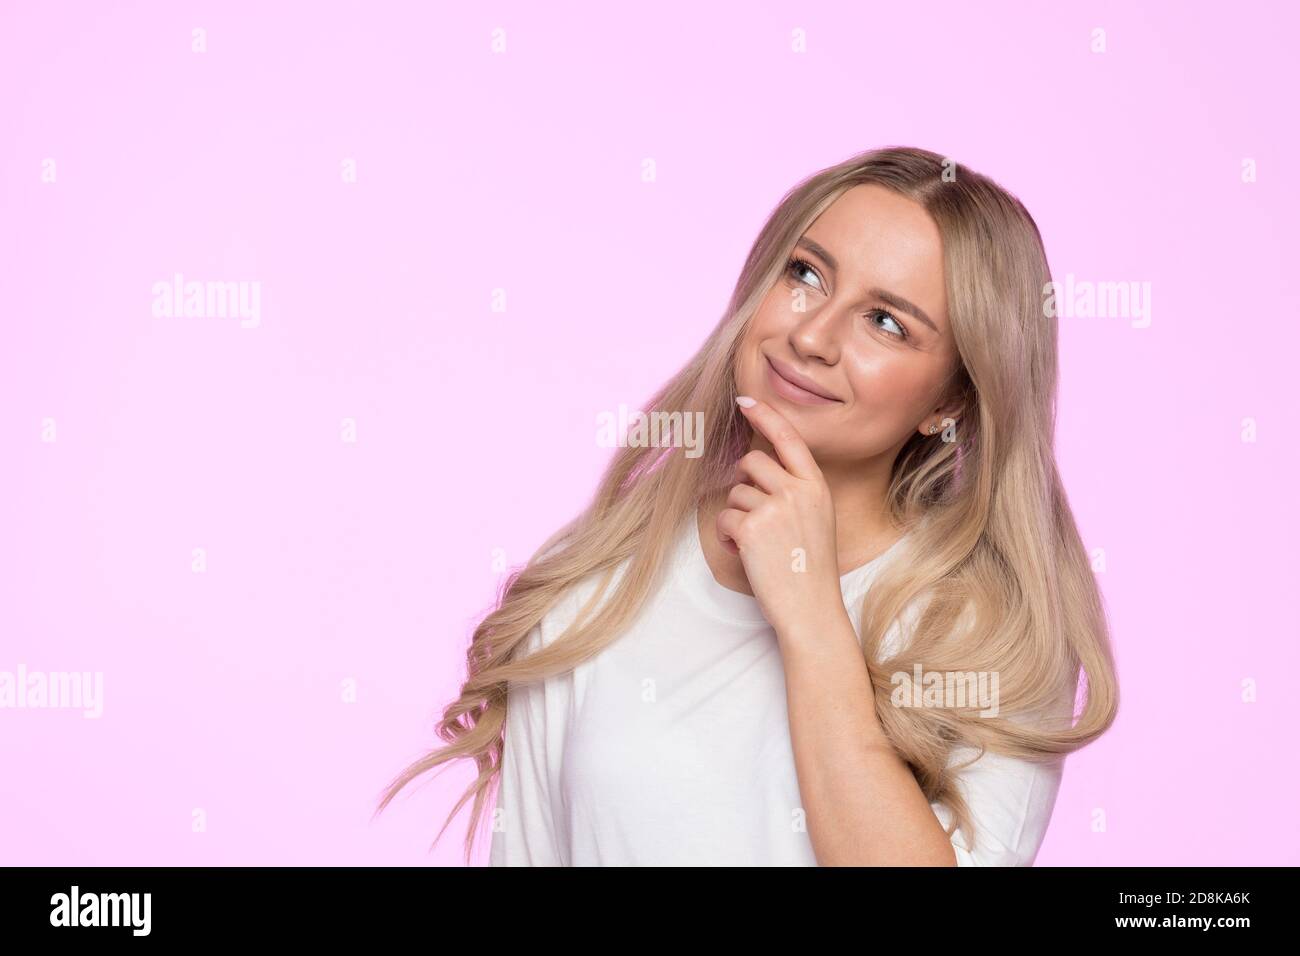 Closeup studio portrait of pensive young blonde female touching her chin, thinking, smiling, pondering and looking up, place for advertising or copy s Stock Photo